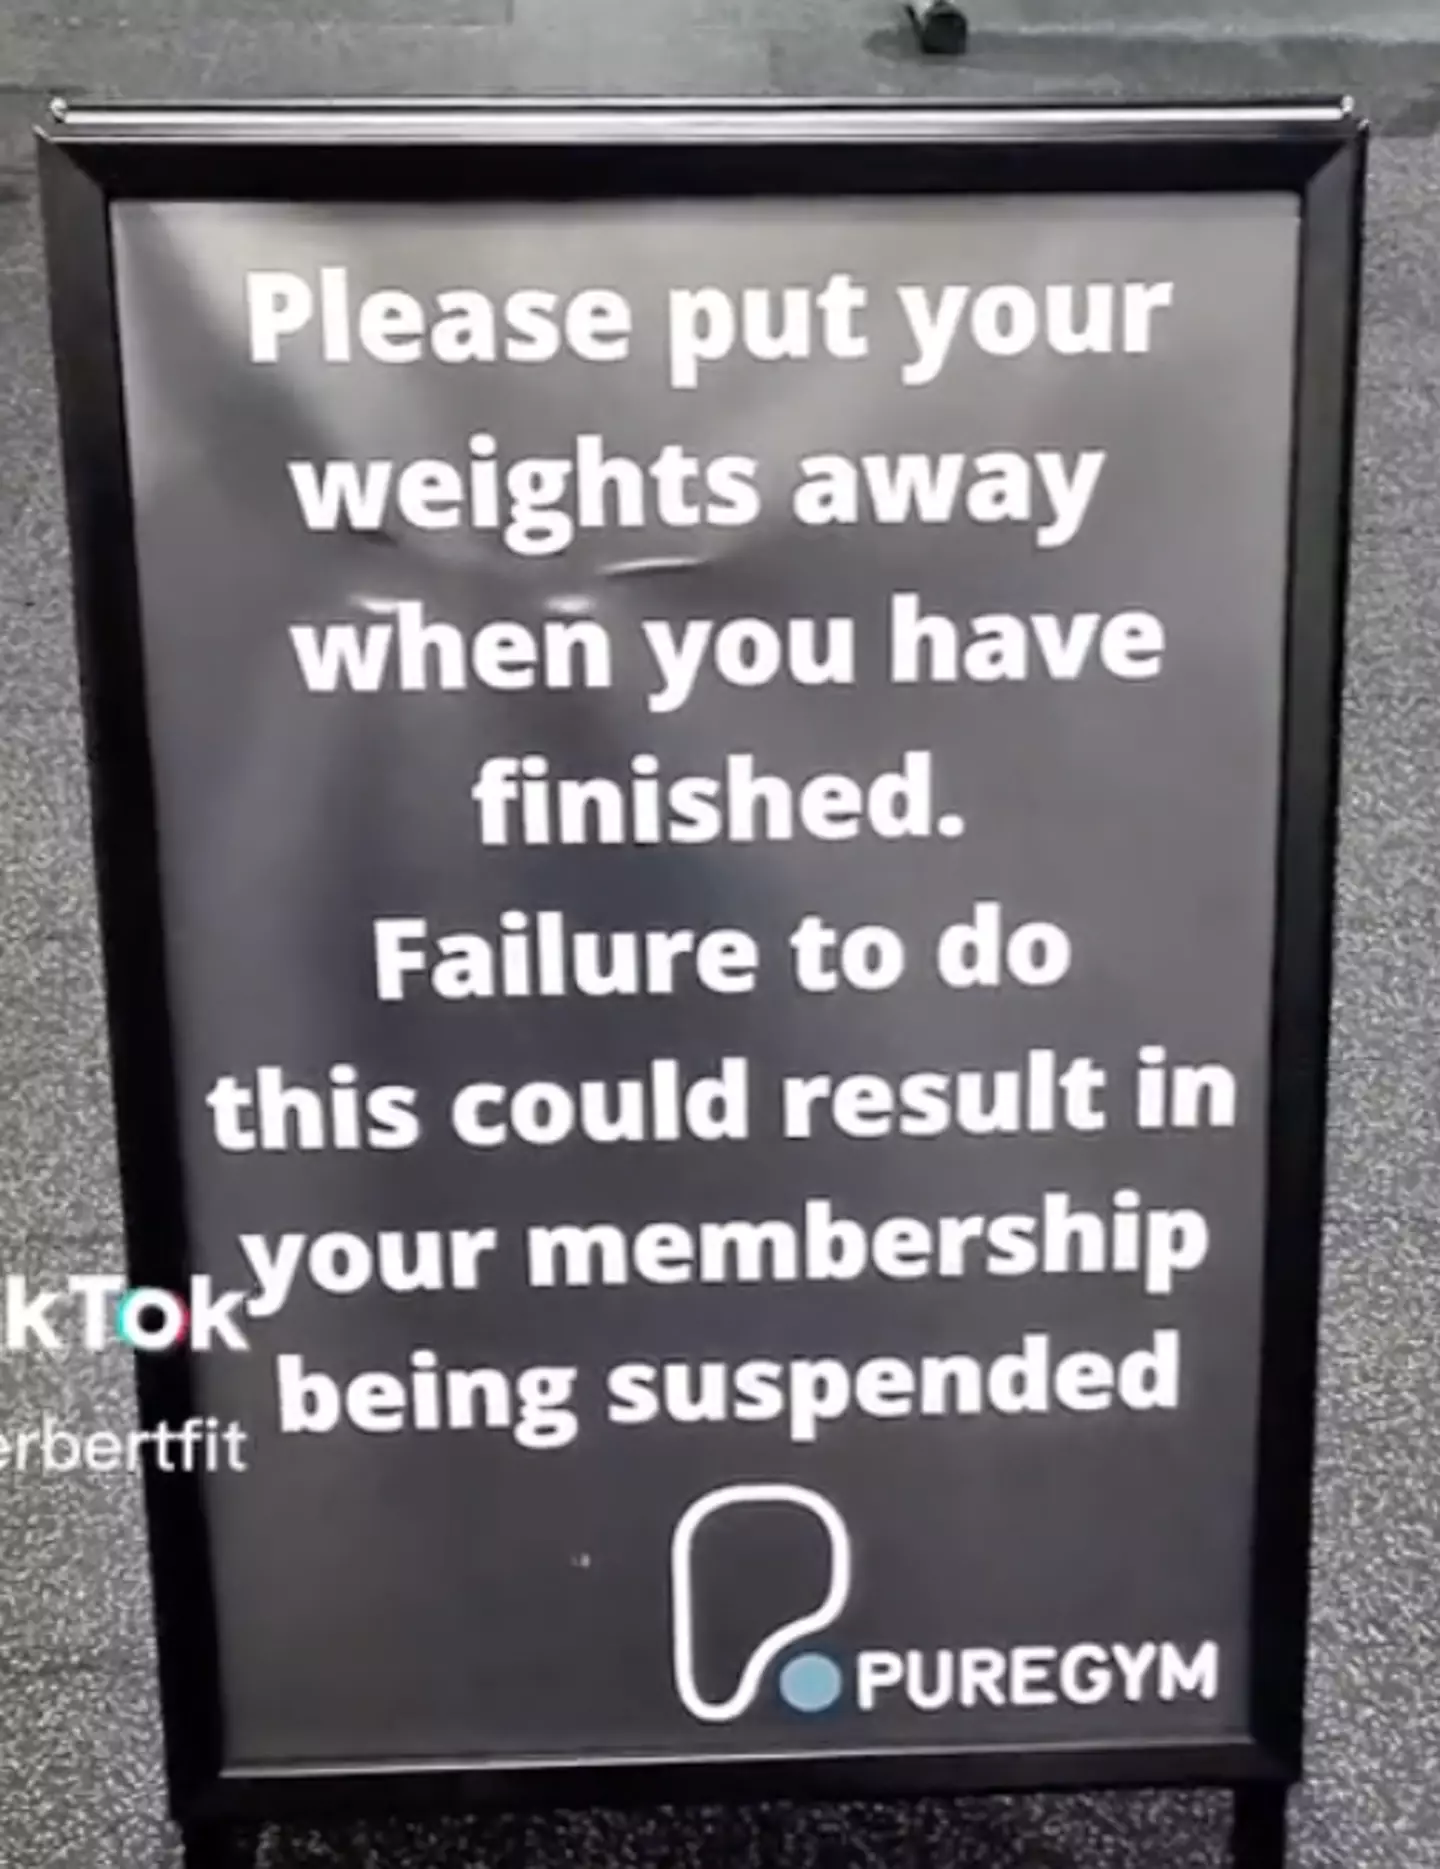 A gym goer spotted the sign in PureGym and posted it on TikTok.